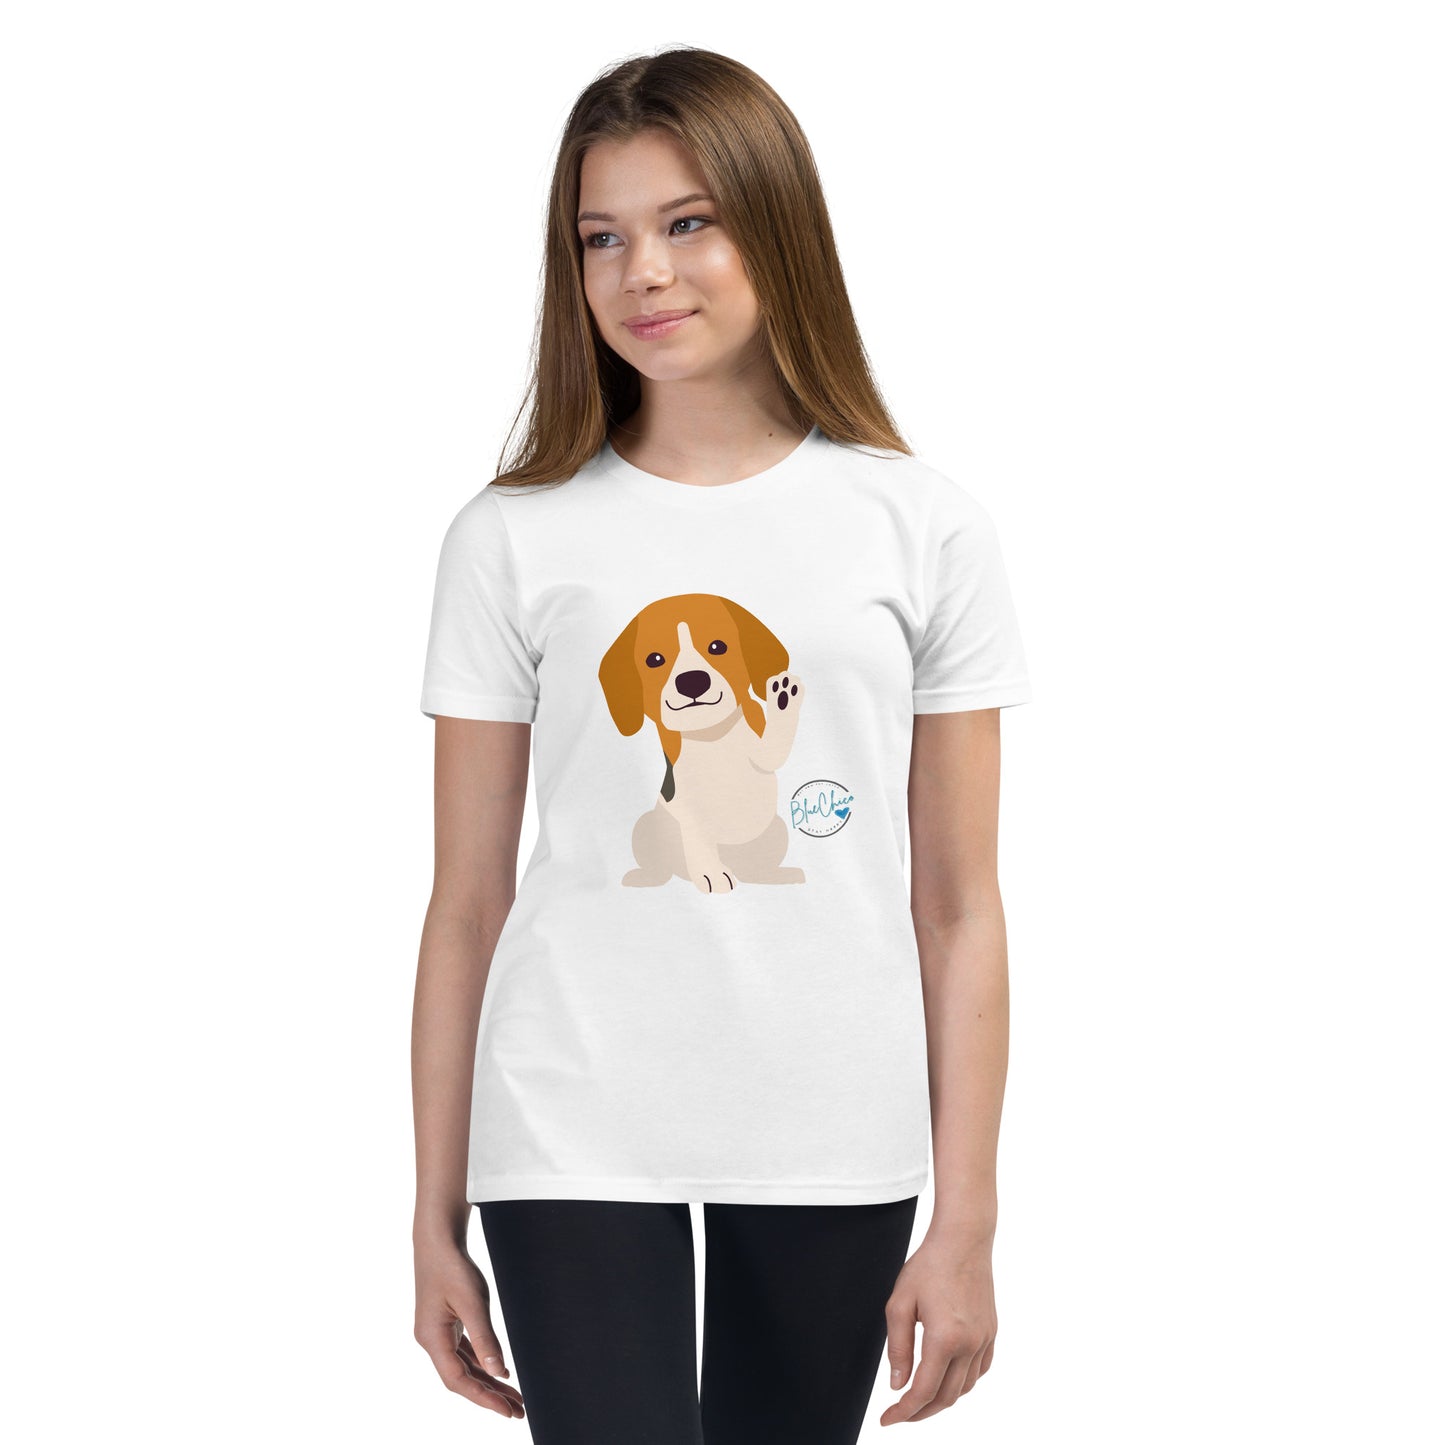 What Up Puppy Youth tee